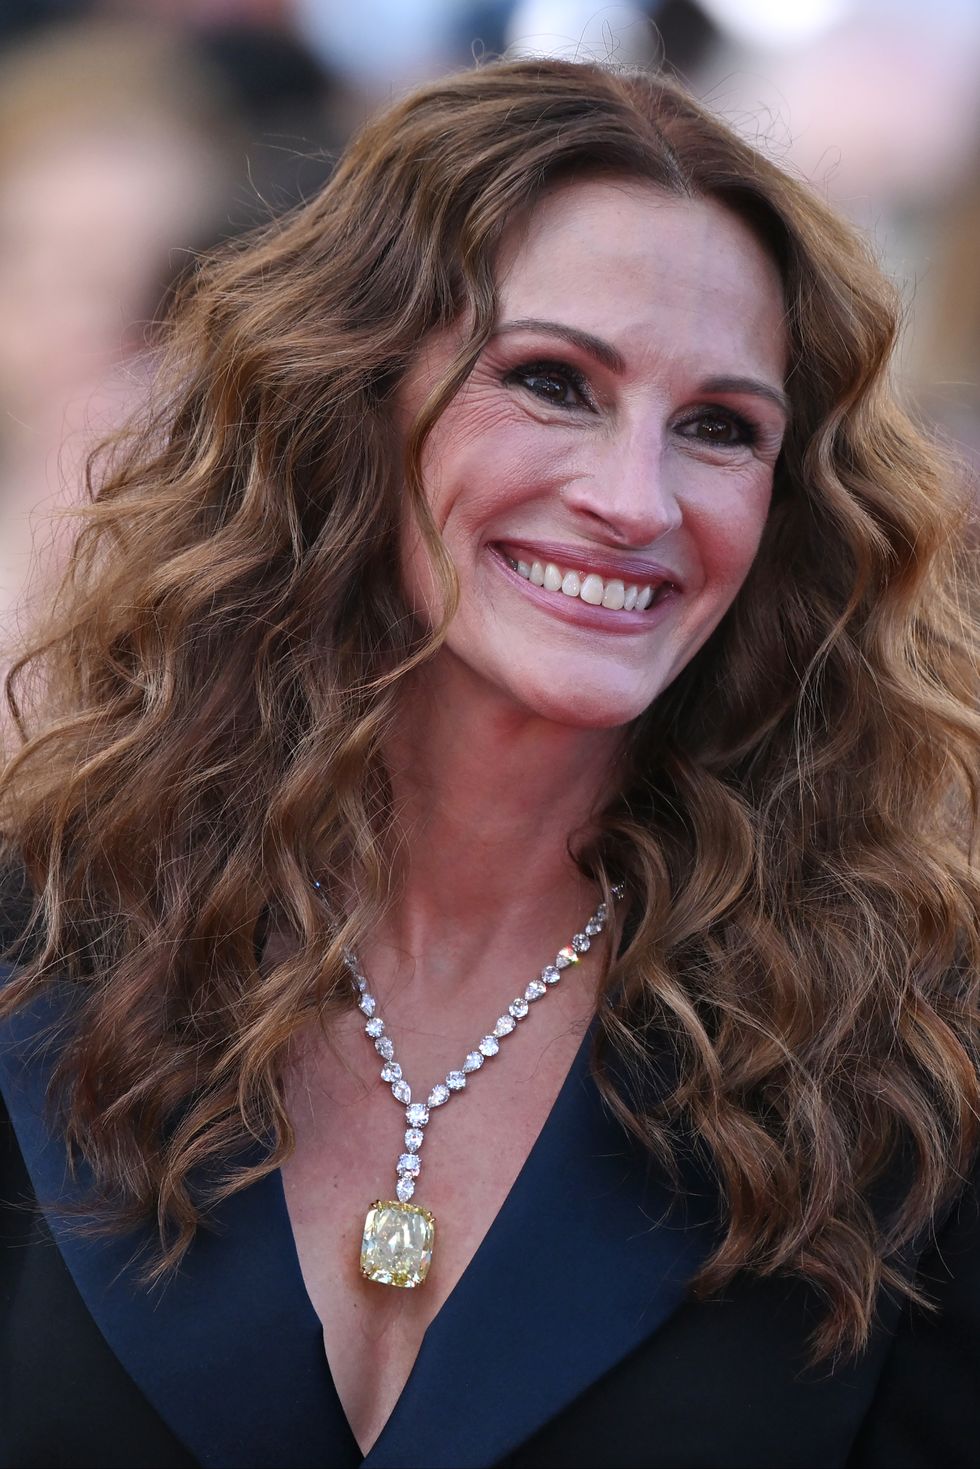 Julia Roberts in Chopard Necklace Featuring 100 Carats Yellow Diamond